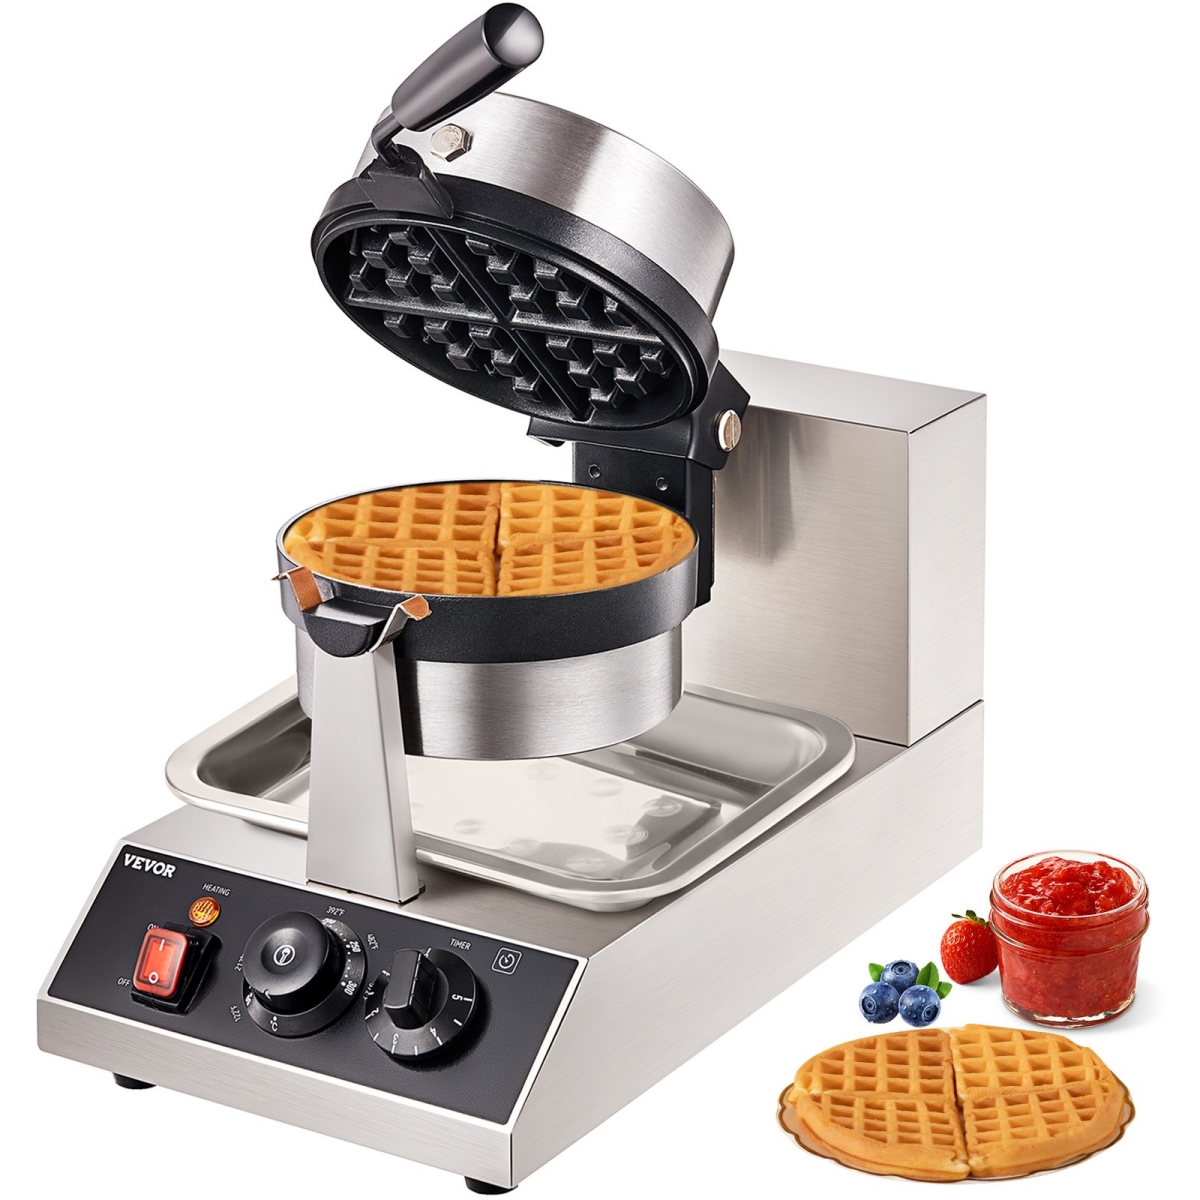 Picture of Vevor YXHFBJHFBFGZ46VD6V1 1300W Rotatable Non-Stick Waffle Iron 120V Commercial Round Waffle Maker